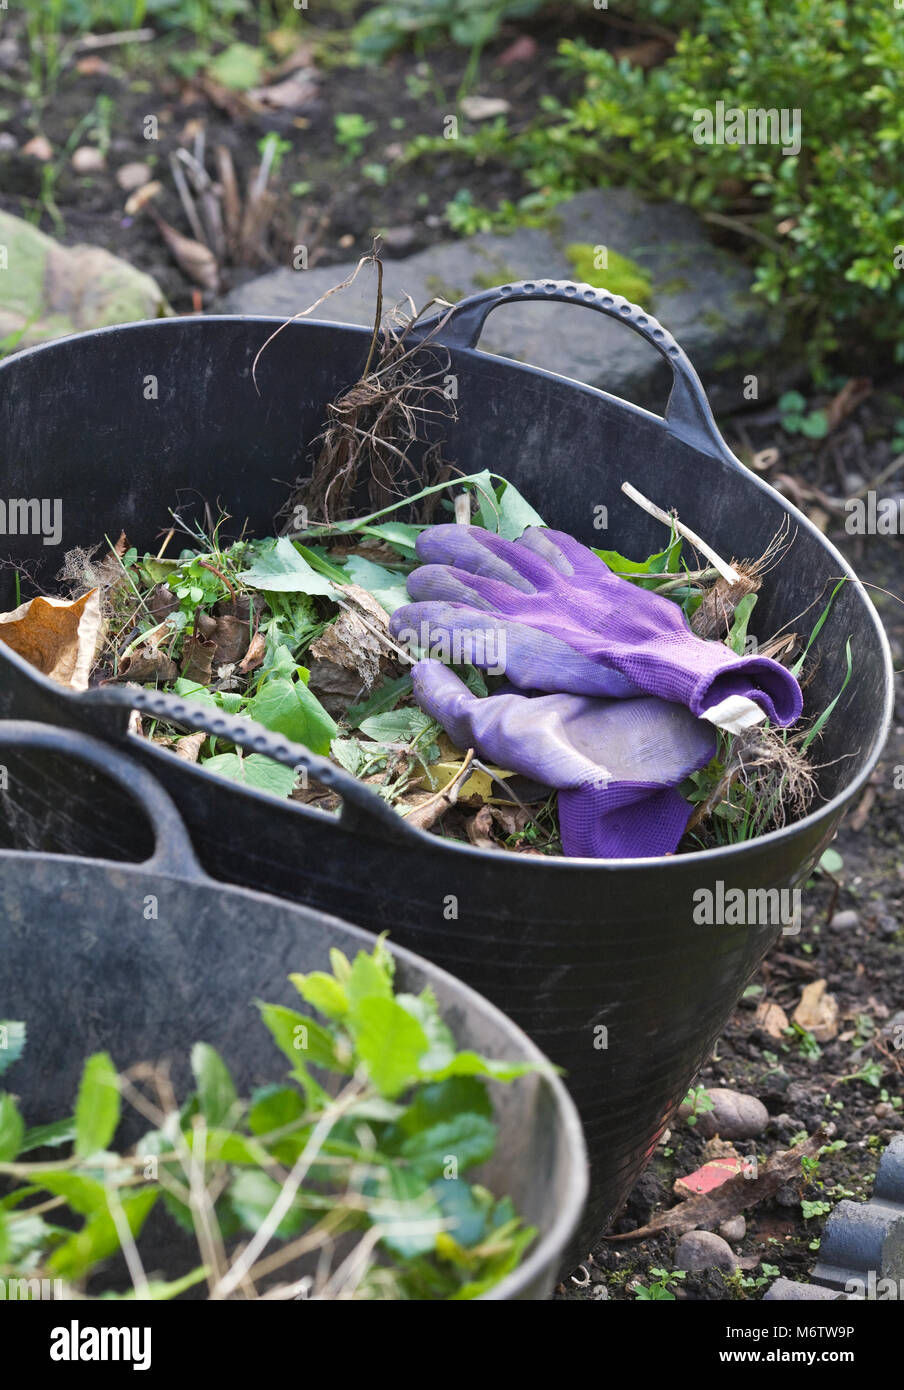 Gardener's trug full of weeds and herbaceous material. Stock Photo